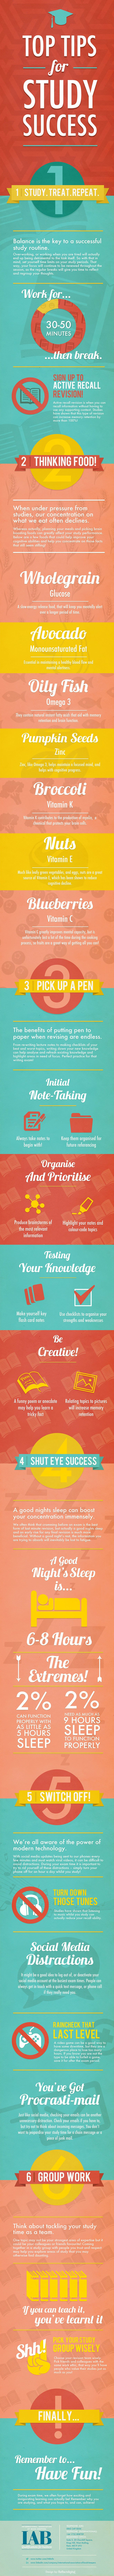 Top Tips For Study Success Infographic